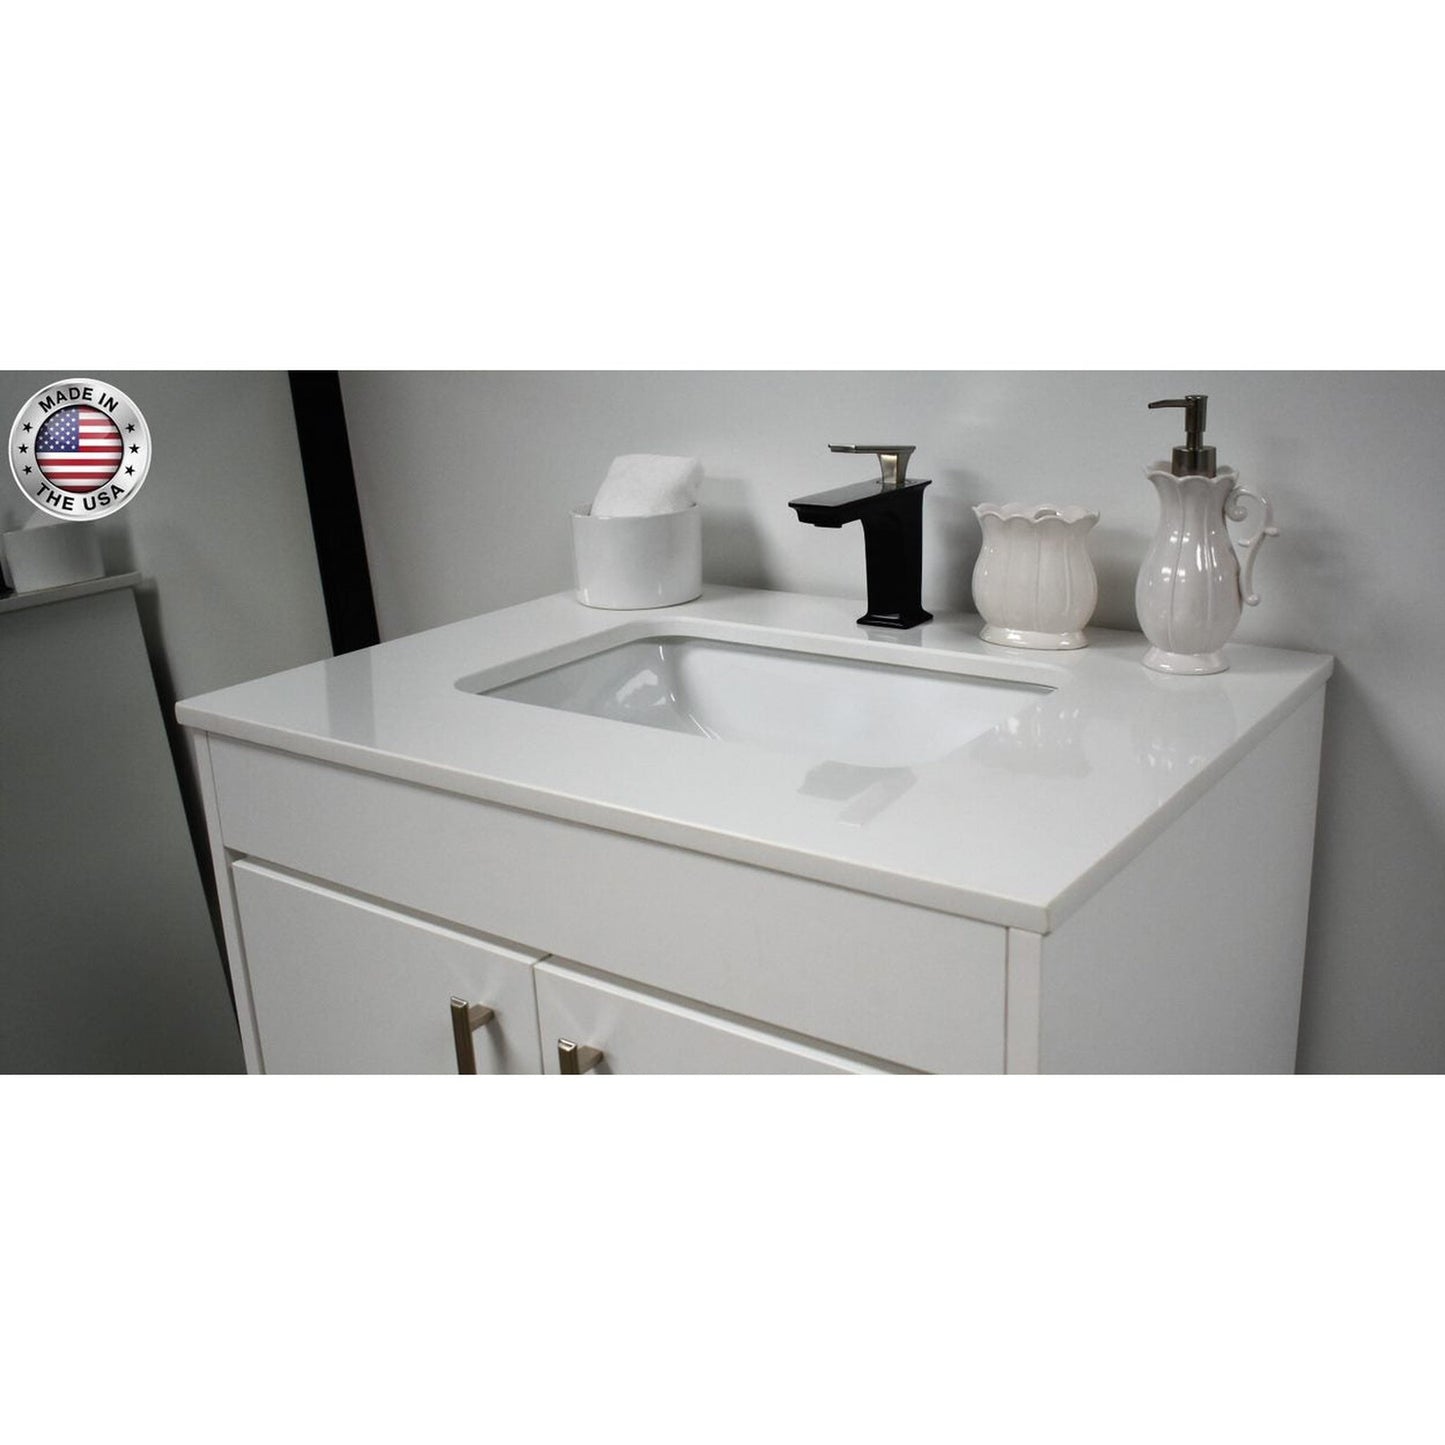 Volpa USA Capri 30" x 22" White Freestanding Modern Bathroom Vanity With Preinstalled Undermount Sink And White Microstone Top With Brushed Nickel Edge Handles